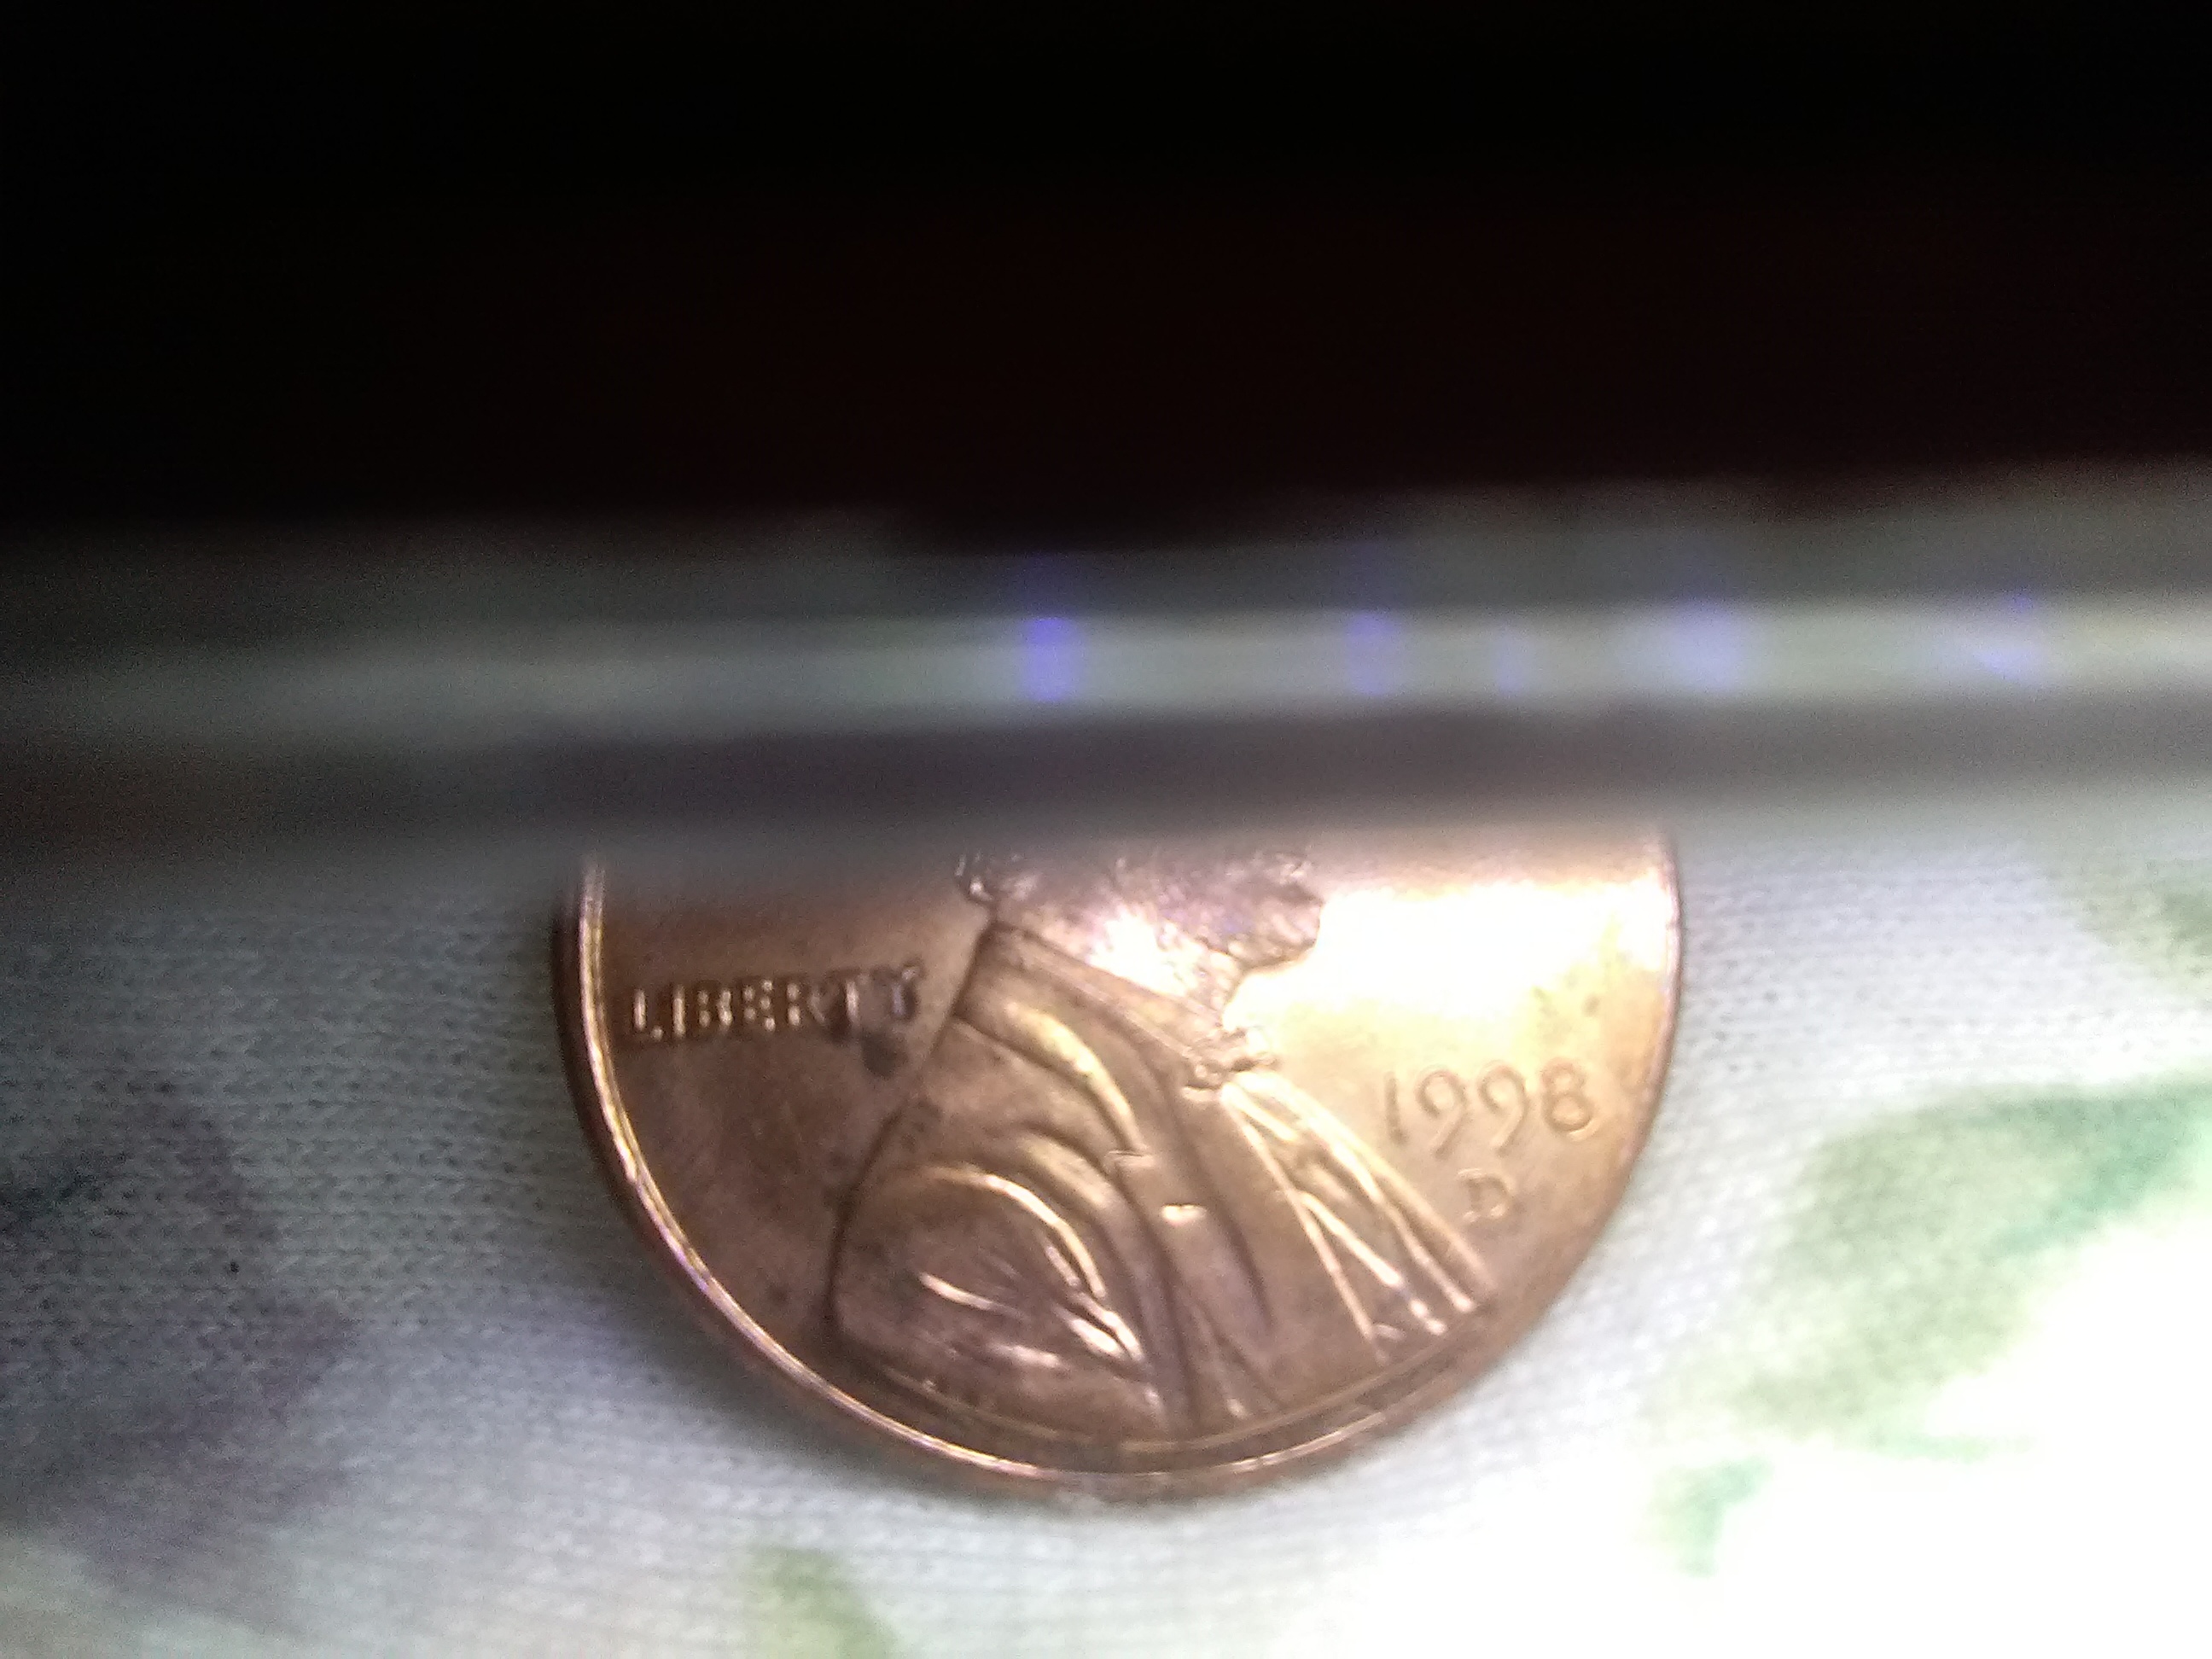 How do you tell if a 1943 steel penny is truly uncirculated or reprocessed?